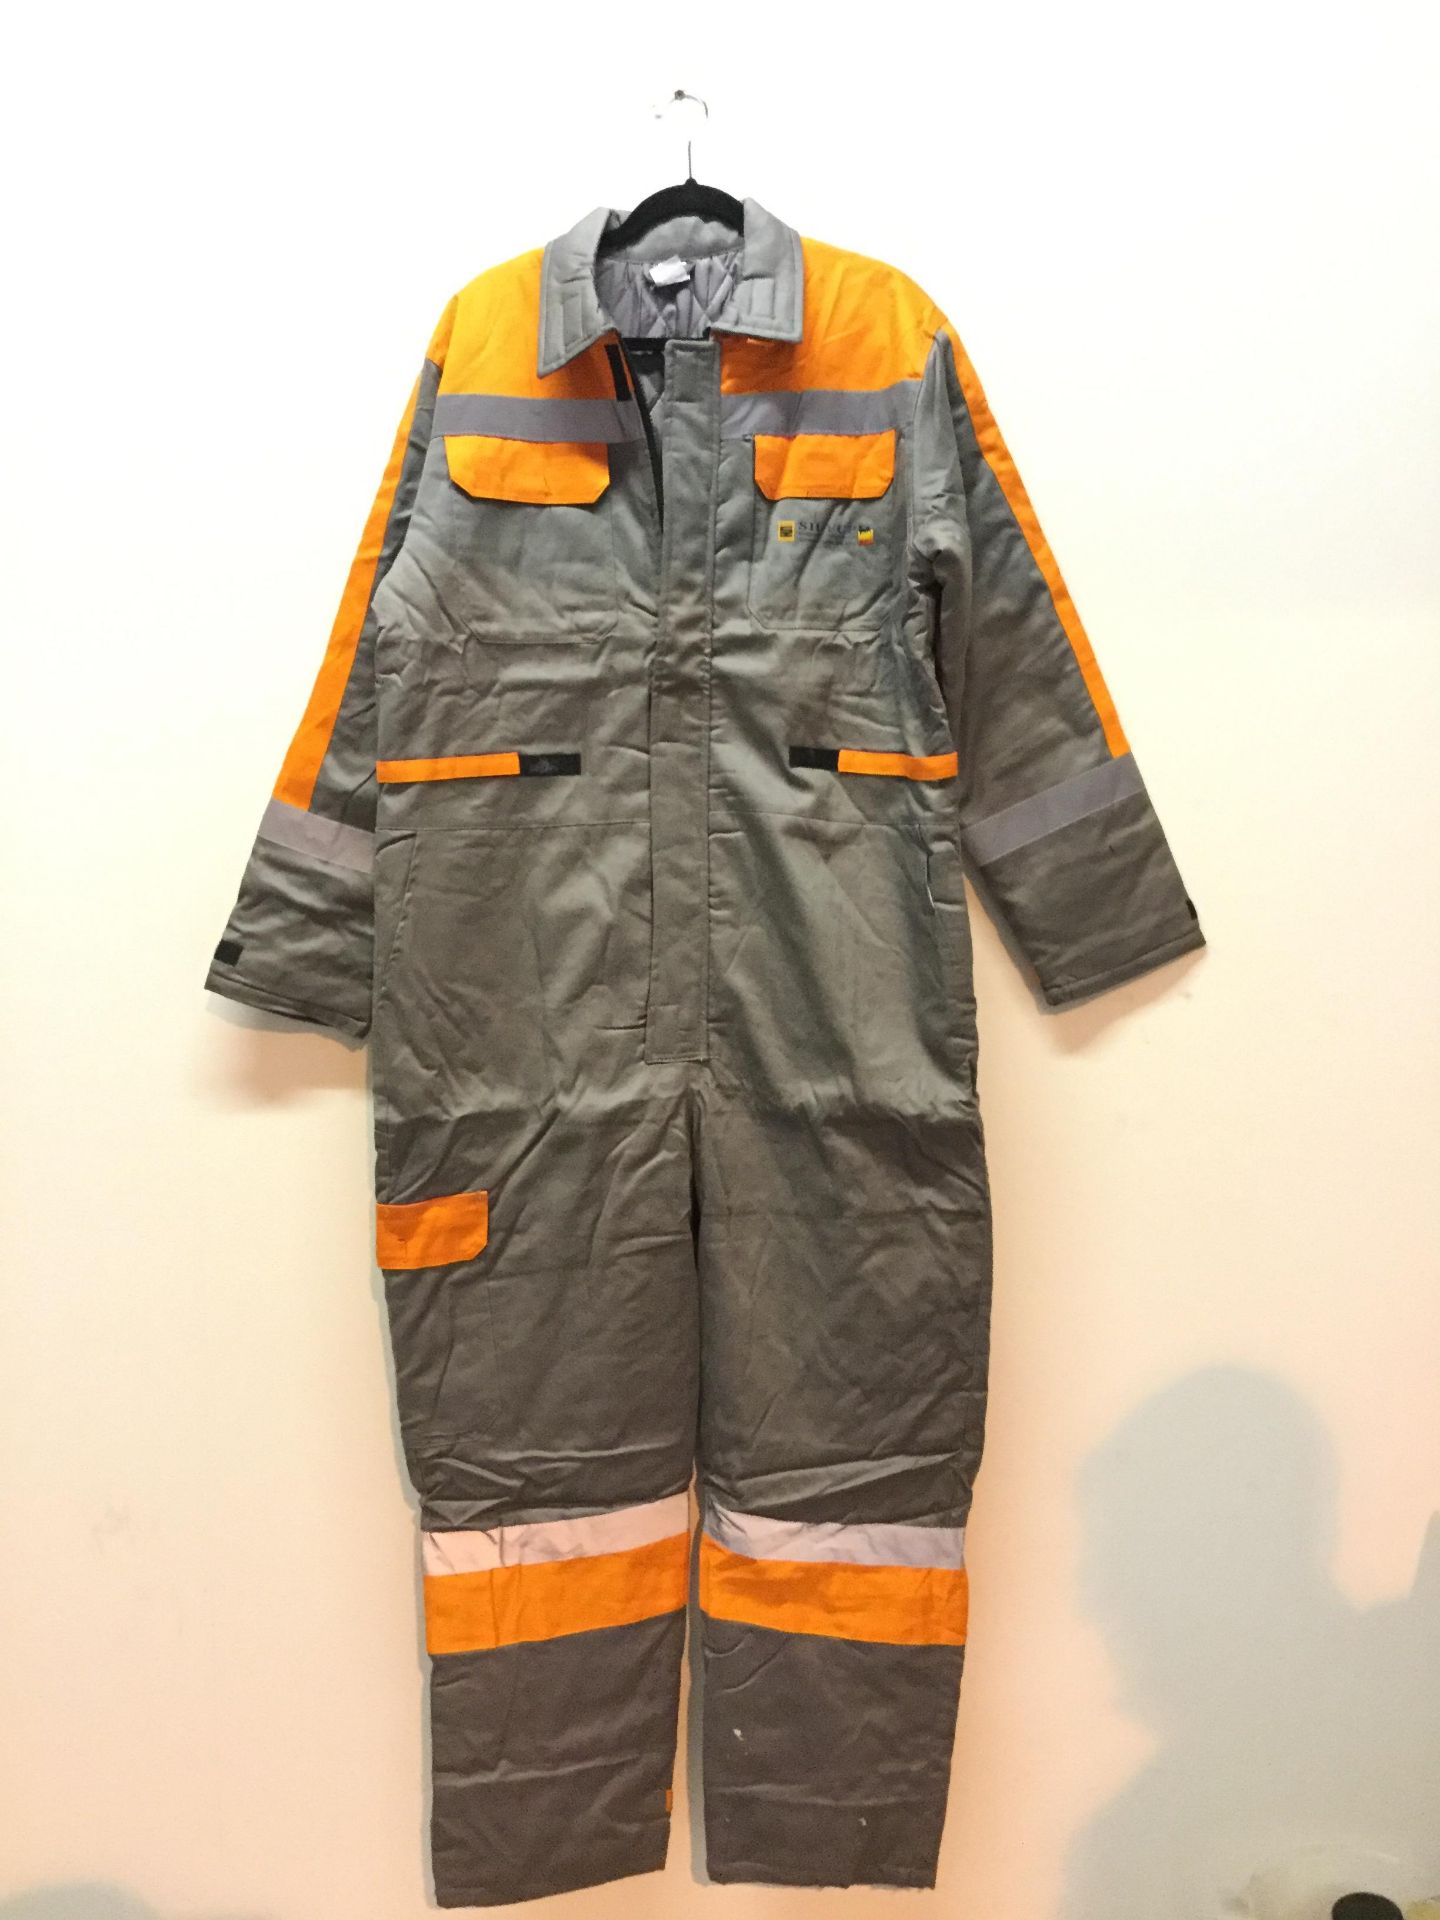 Flame Retardant Winter Coveralls - Size 46 - Image 2 of 3